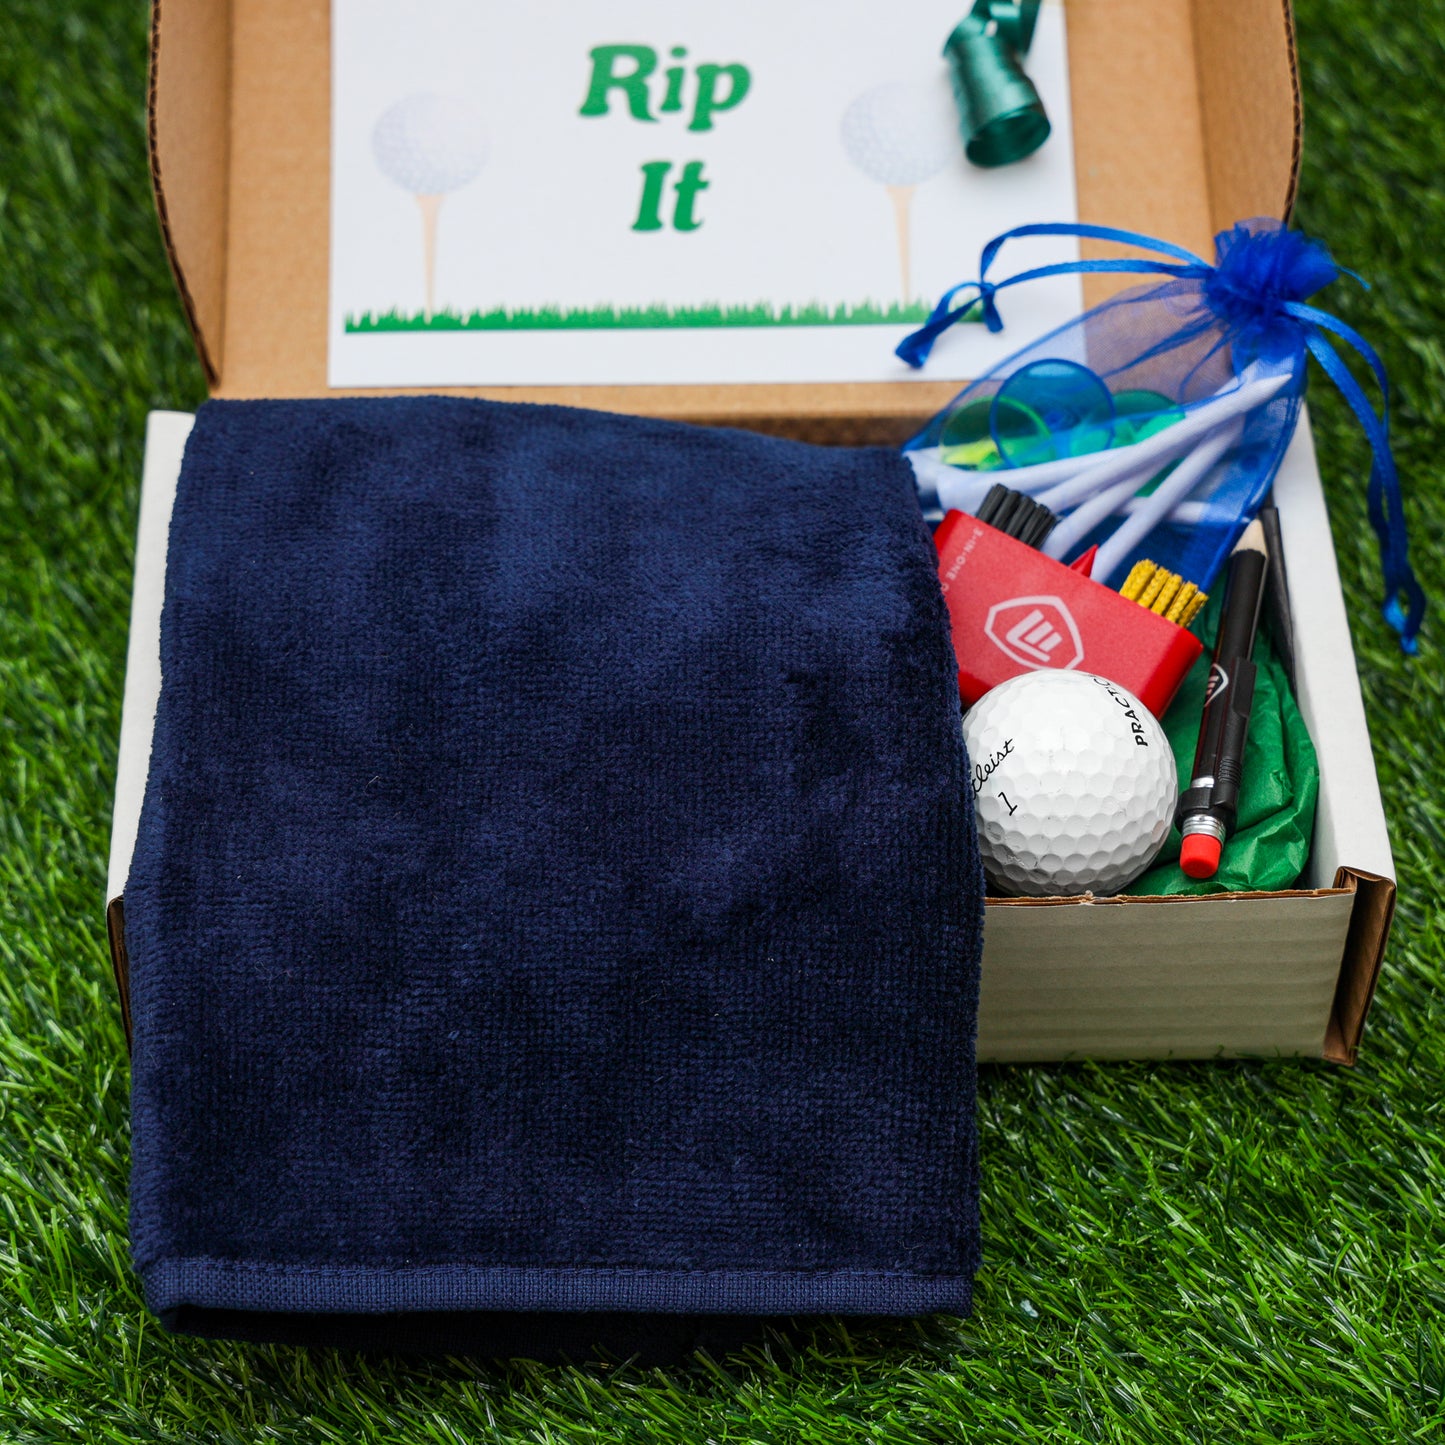 Personalised Tri Fold Golf Towel with Name Golfing Gift Box  - Always Looking Good - Navy Towel  